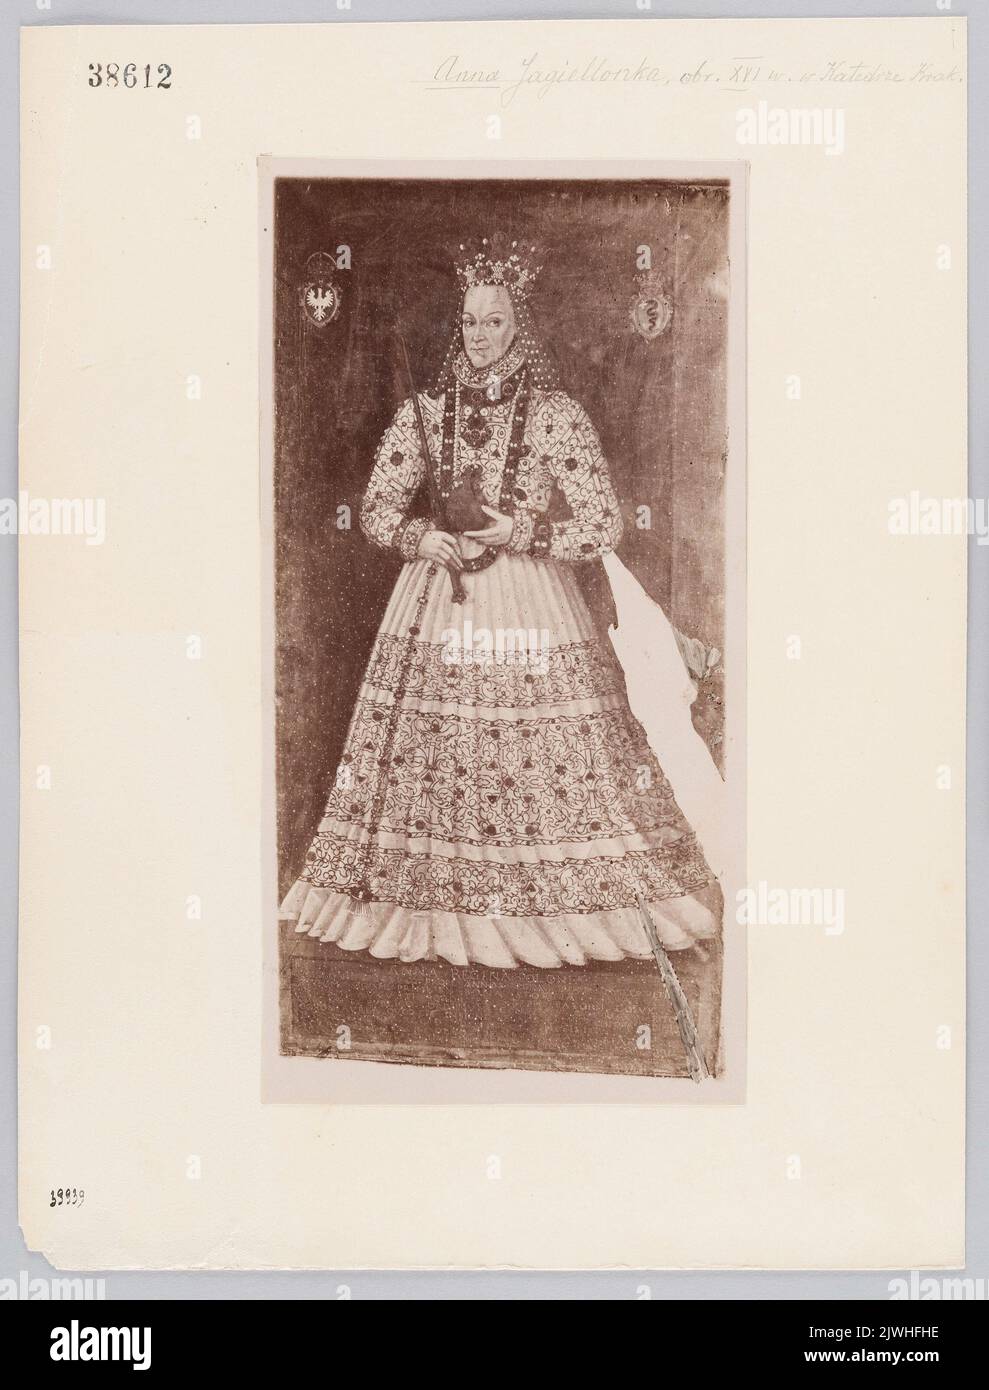 Photograph of painting: Anna Jagiellon, painting from the 16th century, at the cathedral of Cracow. Krieger, Ignacy (Kraków ; zakład fotograficzny ; 1860-1926), photo studio Stock Photo